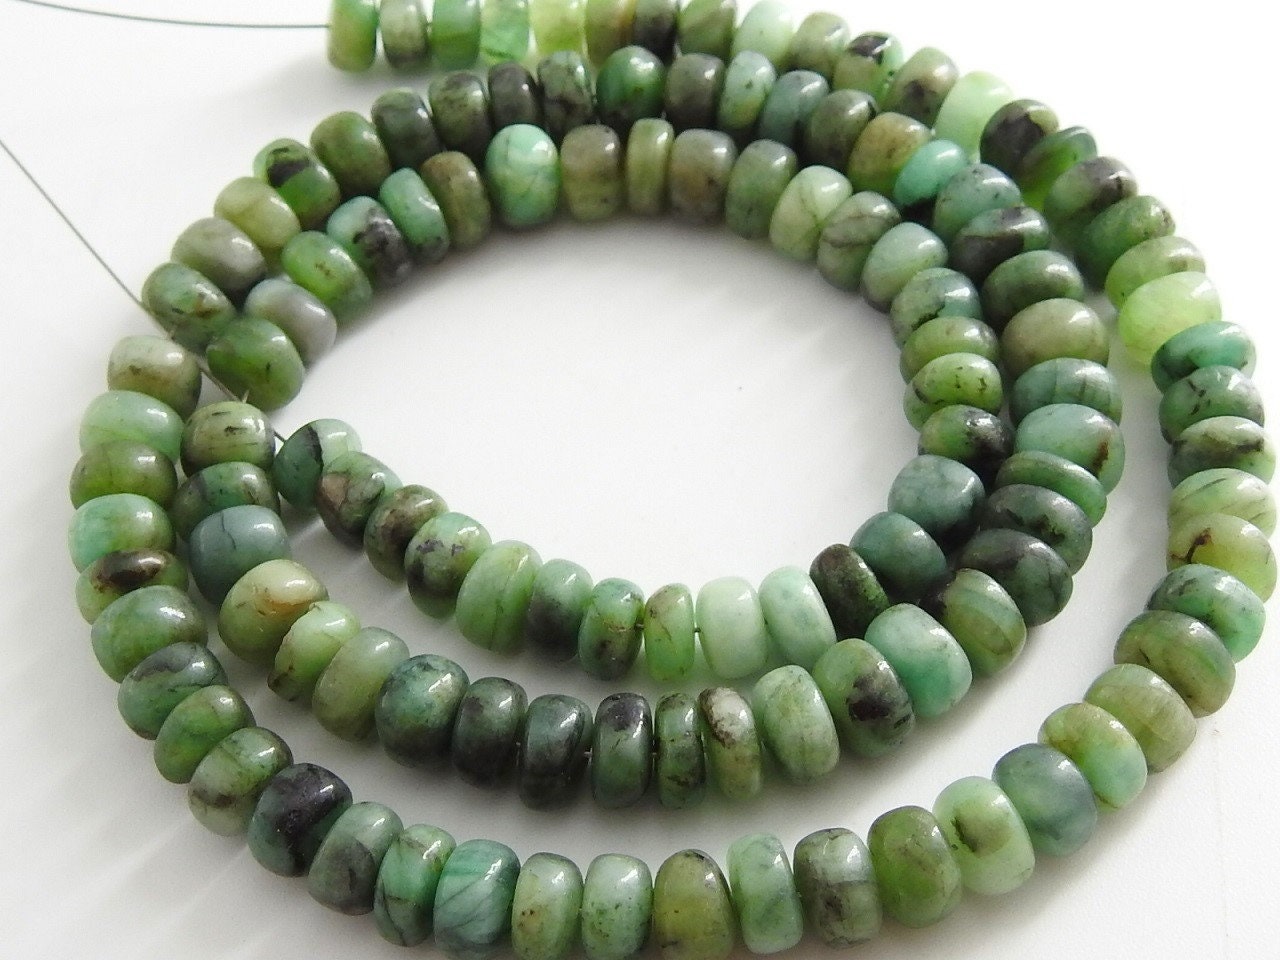 Emerald Smooth Roundel Bead,Shaded,Loose Stone,Handmade,Wholesale Price,New Arrival,18Inch Strand 100%Natural PME(B12) | Save 33% - Rajasthan Living 20